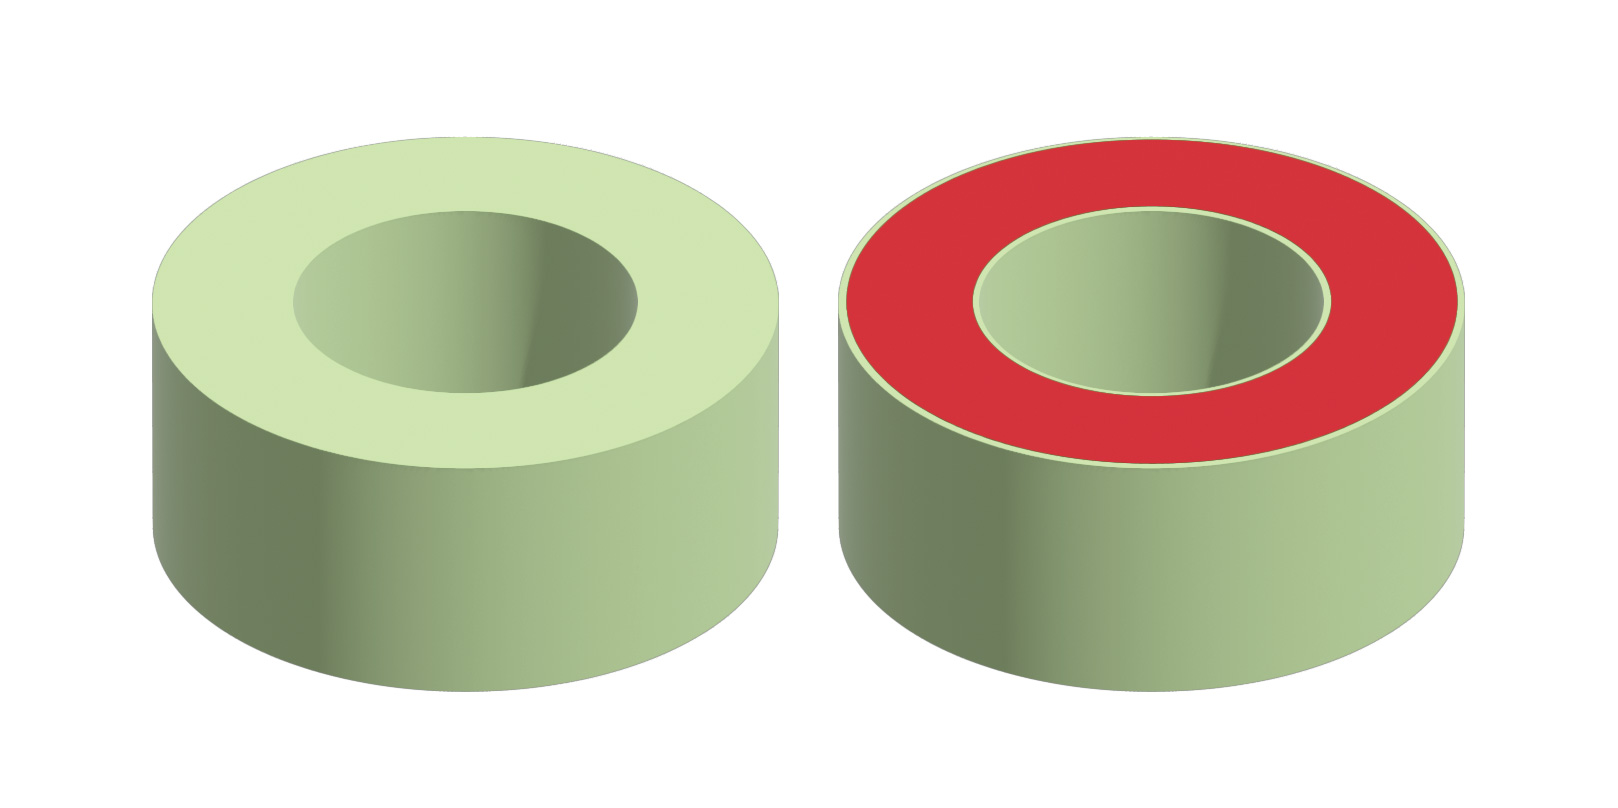 18 material-GOTREND Article-What does the color of the inductor ring mean? High conductivity ring